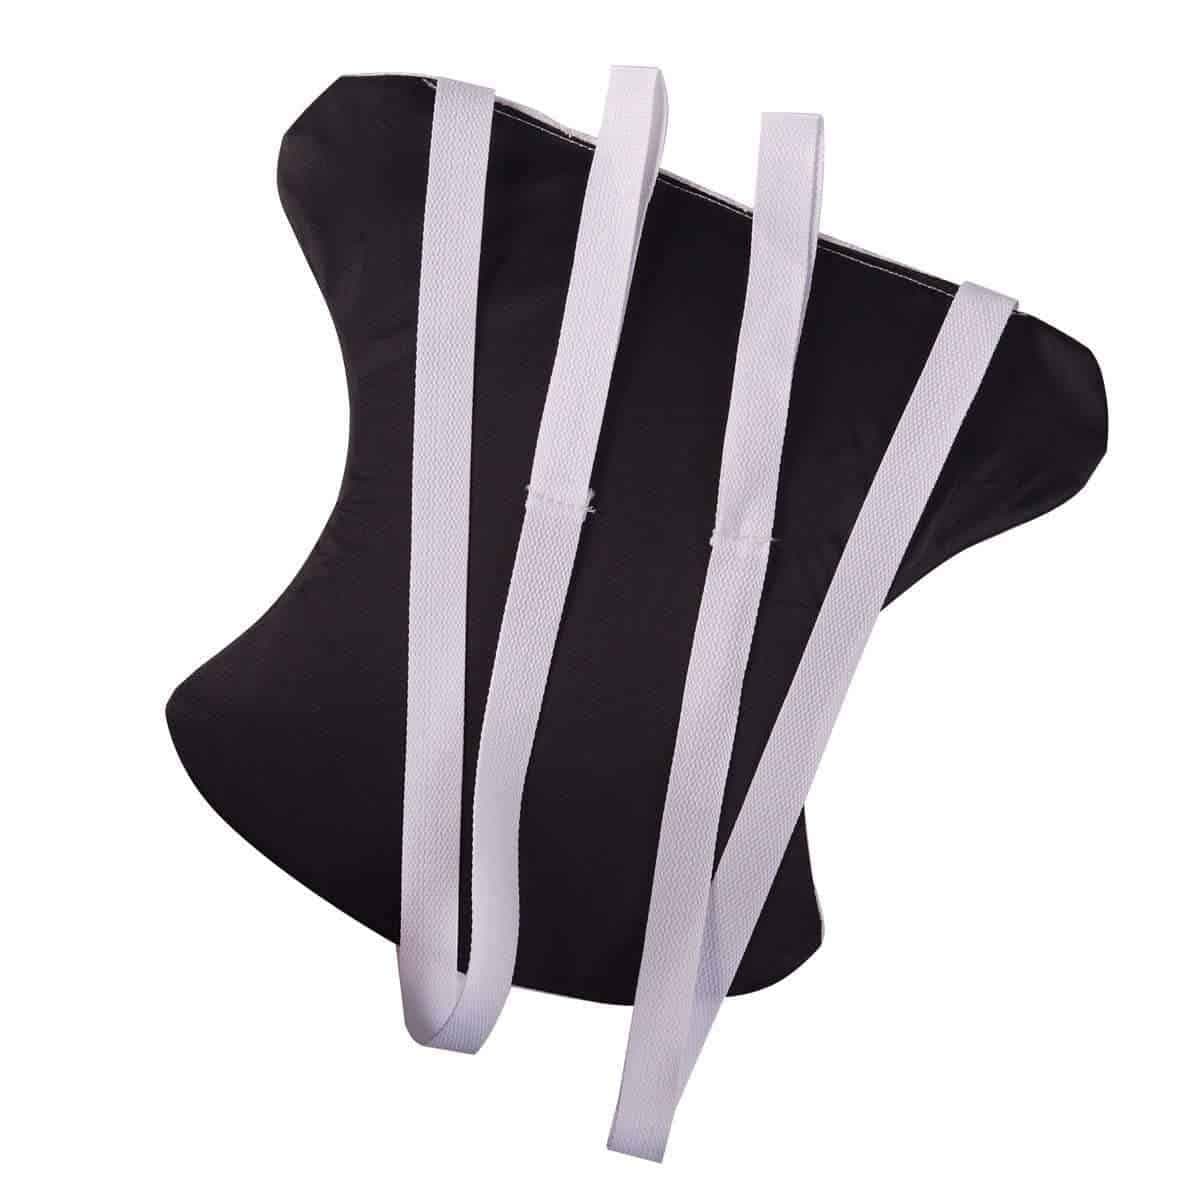 DMI Deluxe No Bend Sock Aid to Easily Pull on Socks, Slip Resistance - Senior.com Daily Living Aids